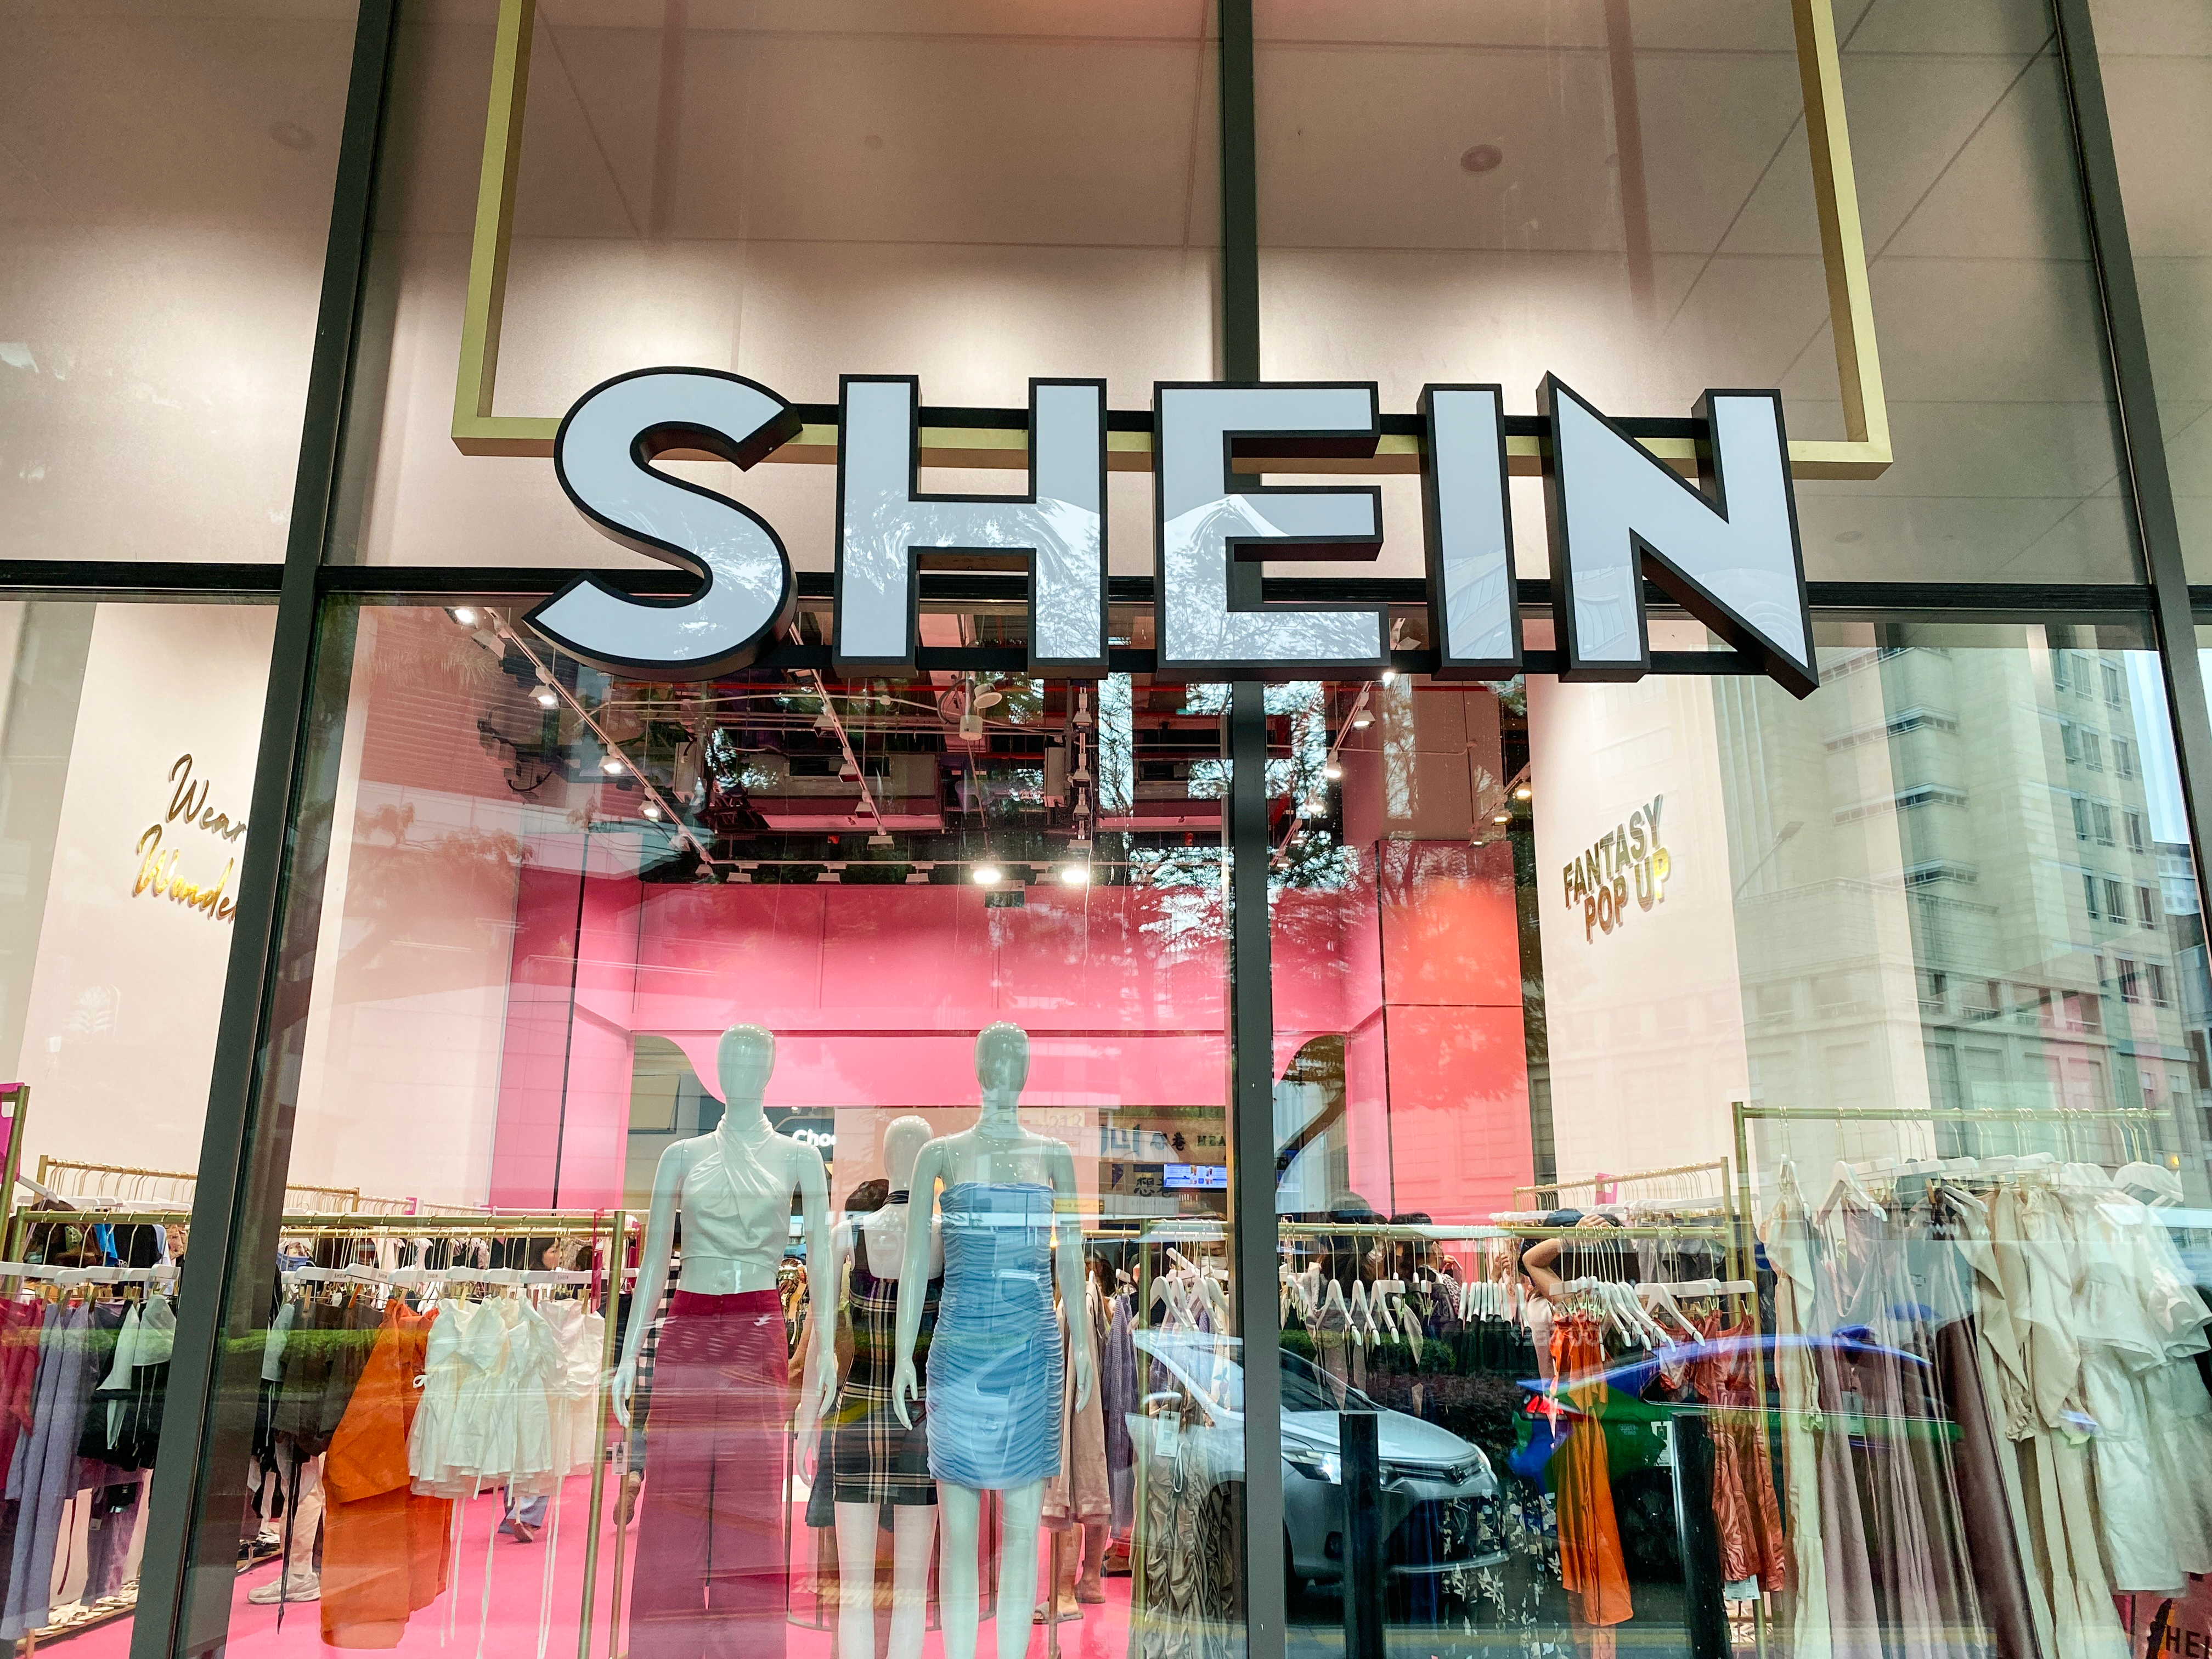 Shein targets $60b revenue by 2025 as IPO nears